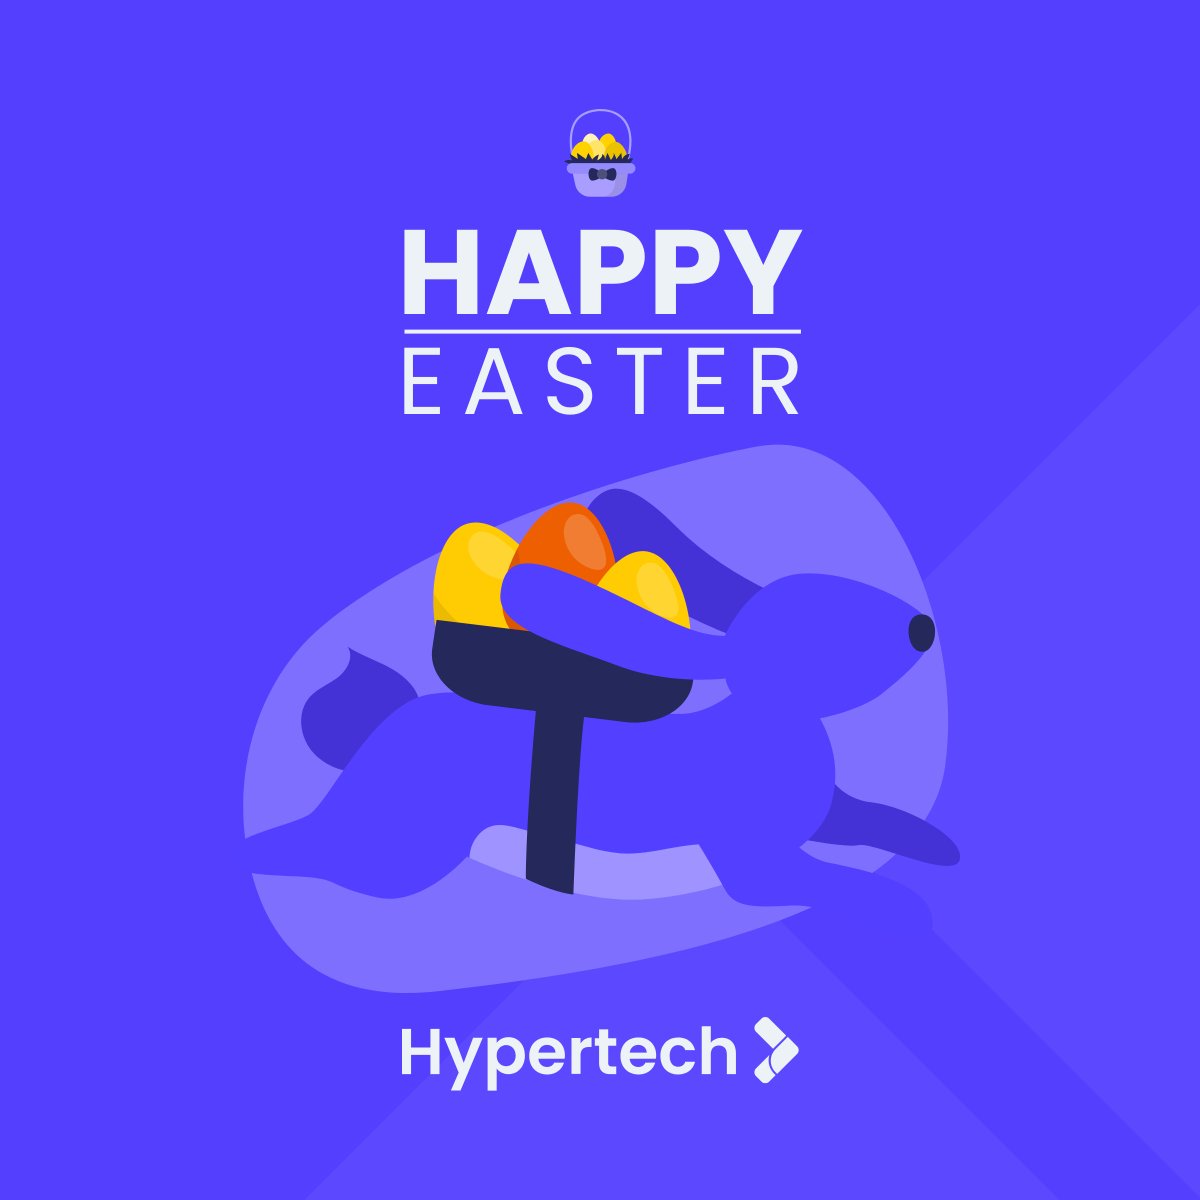 Easter is a time of reflection and inspiration, whether you're celebrating it this week or the next. At Hypertech S.A., we're reminded of the power of technology to connect people from all corners of the world and create positive change.